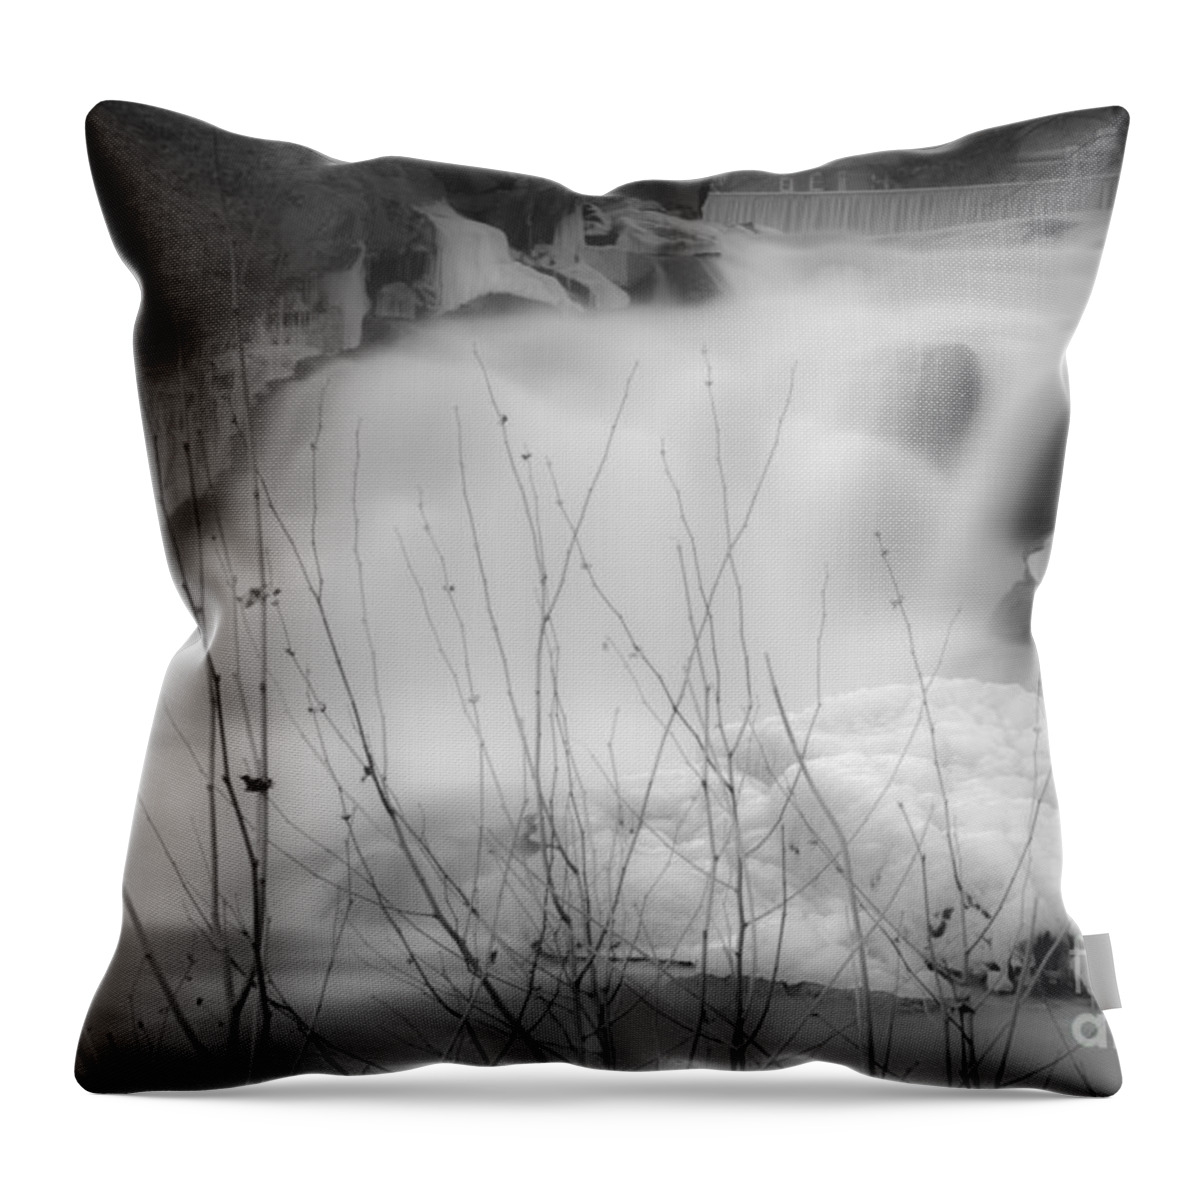 Misty Throw Pillow featuring the photograph Misty Icy Waterfall by Jim DeLillo